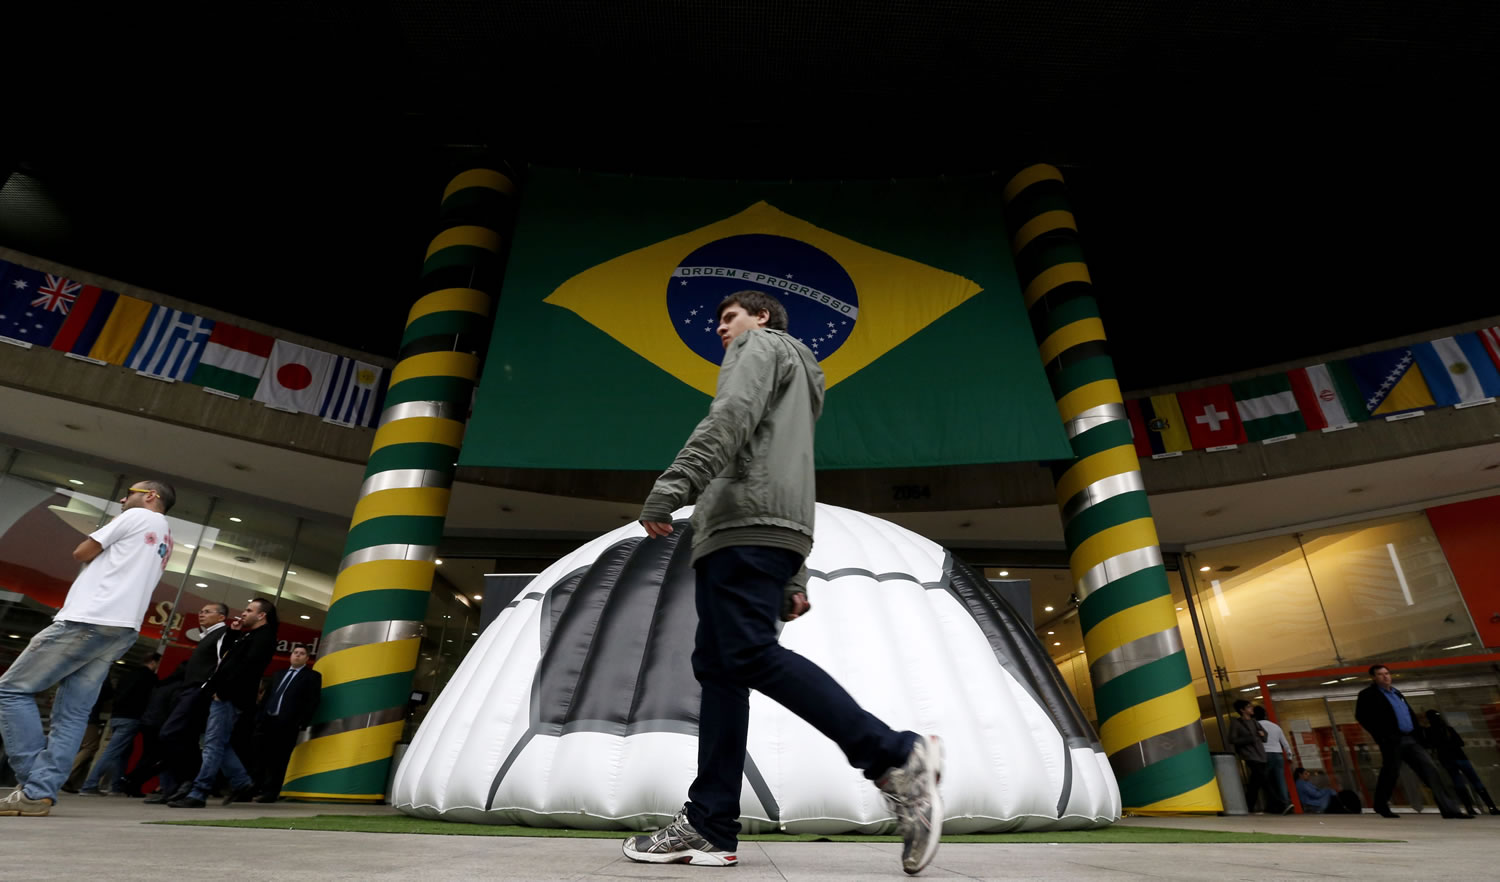 A man walks near a shopping center where a large Brazil flag and half of a soccer ball decorate the entrance in Sao Paulo, Brazil, Tuesday, June 10, 2014. The World Cup is set to open on June 12 with Brazil facing Croatia in Sao Paulo.